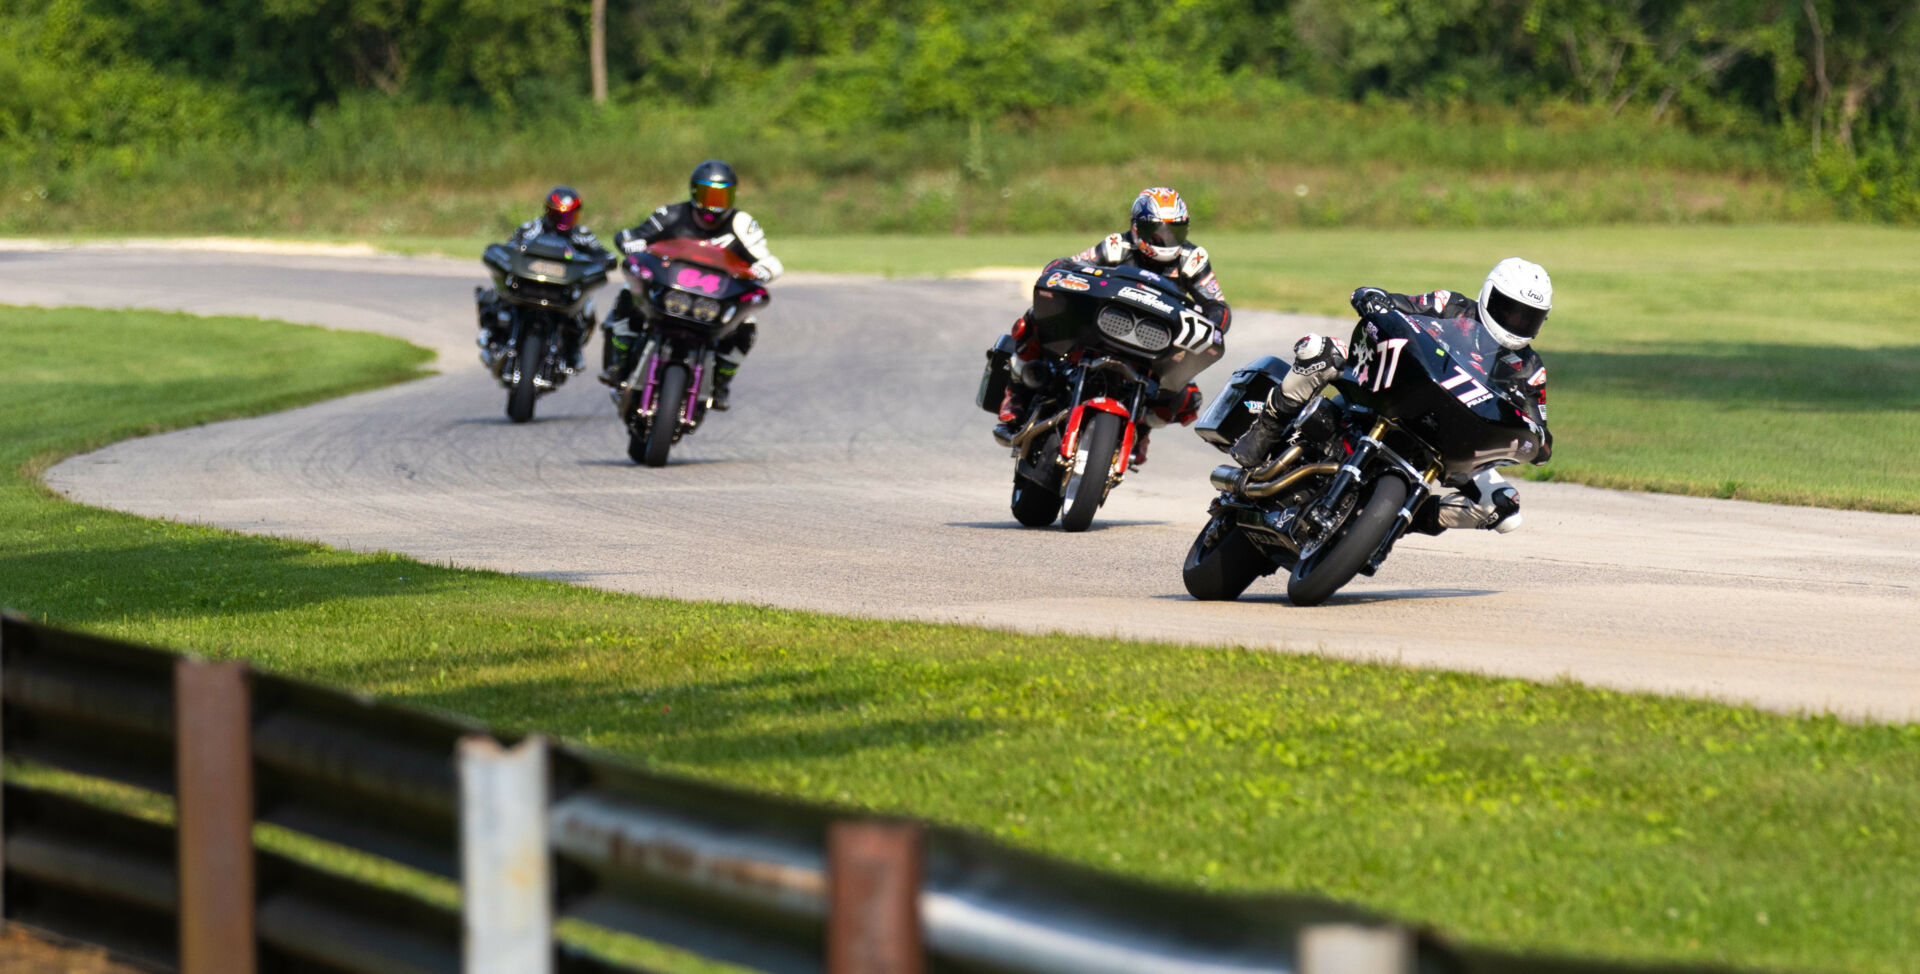 Bagger Racing League (BRL) action from the 2023 season. Photo by Tom Punchur, courtesy BRL.